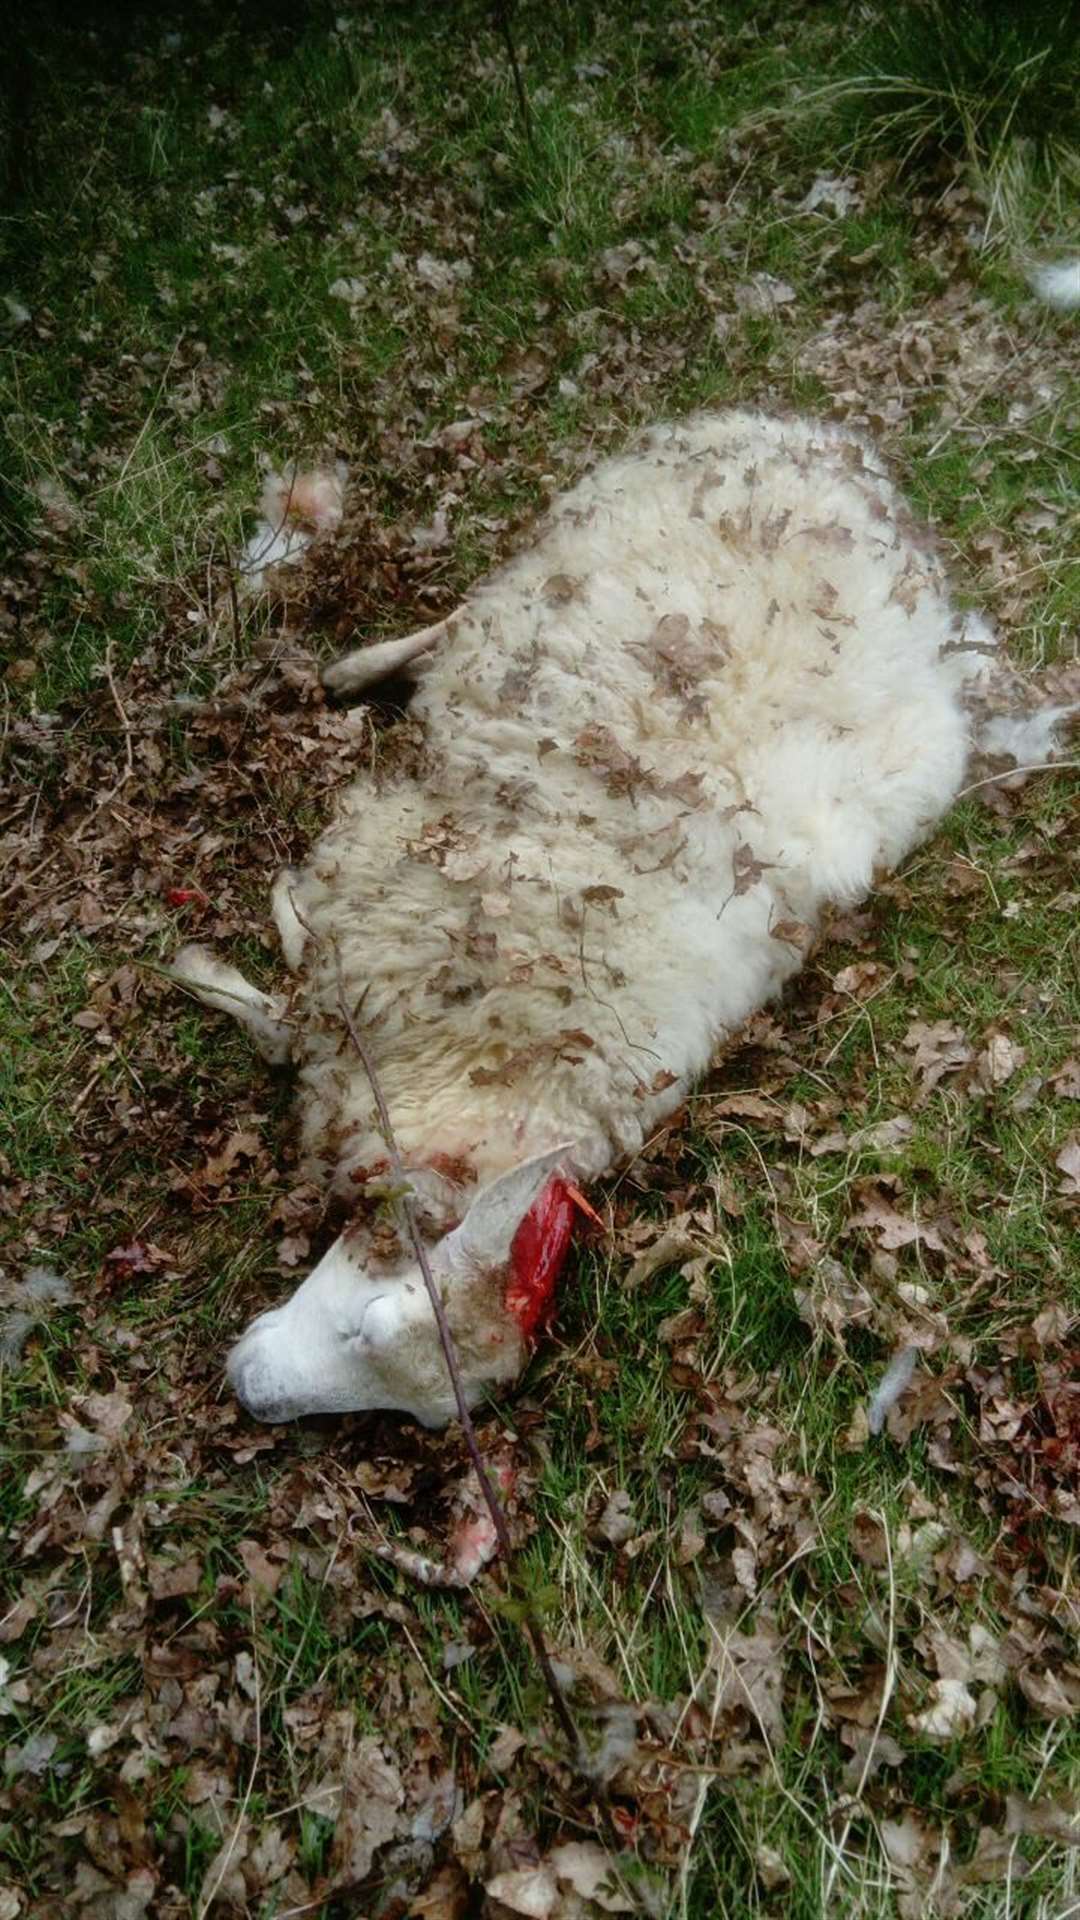 The injuties caused to a sheep by two dogs